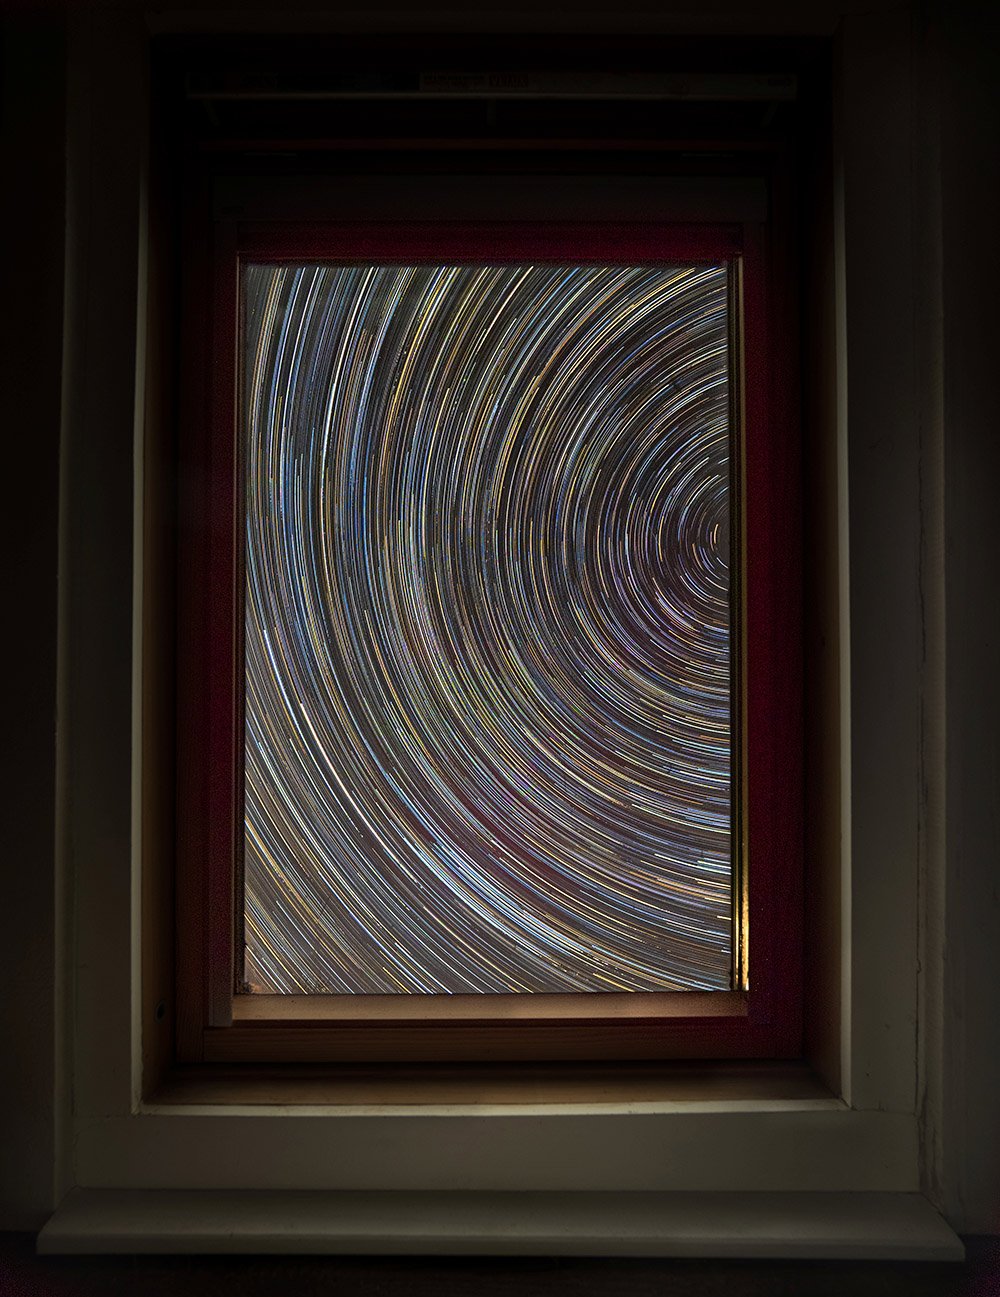 Star trail taken from inside a house in Shropshire